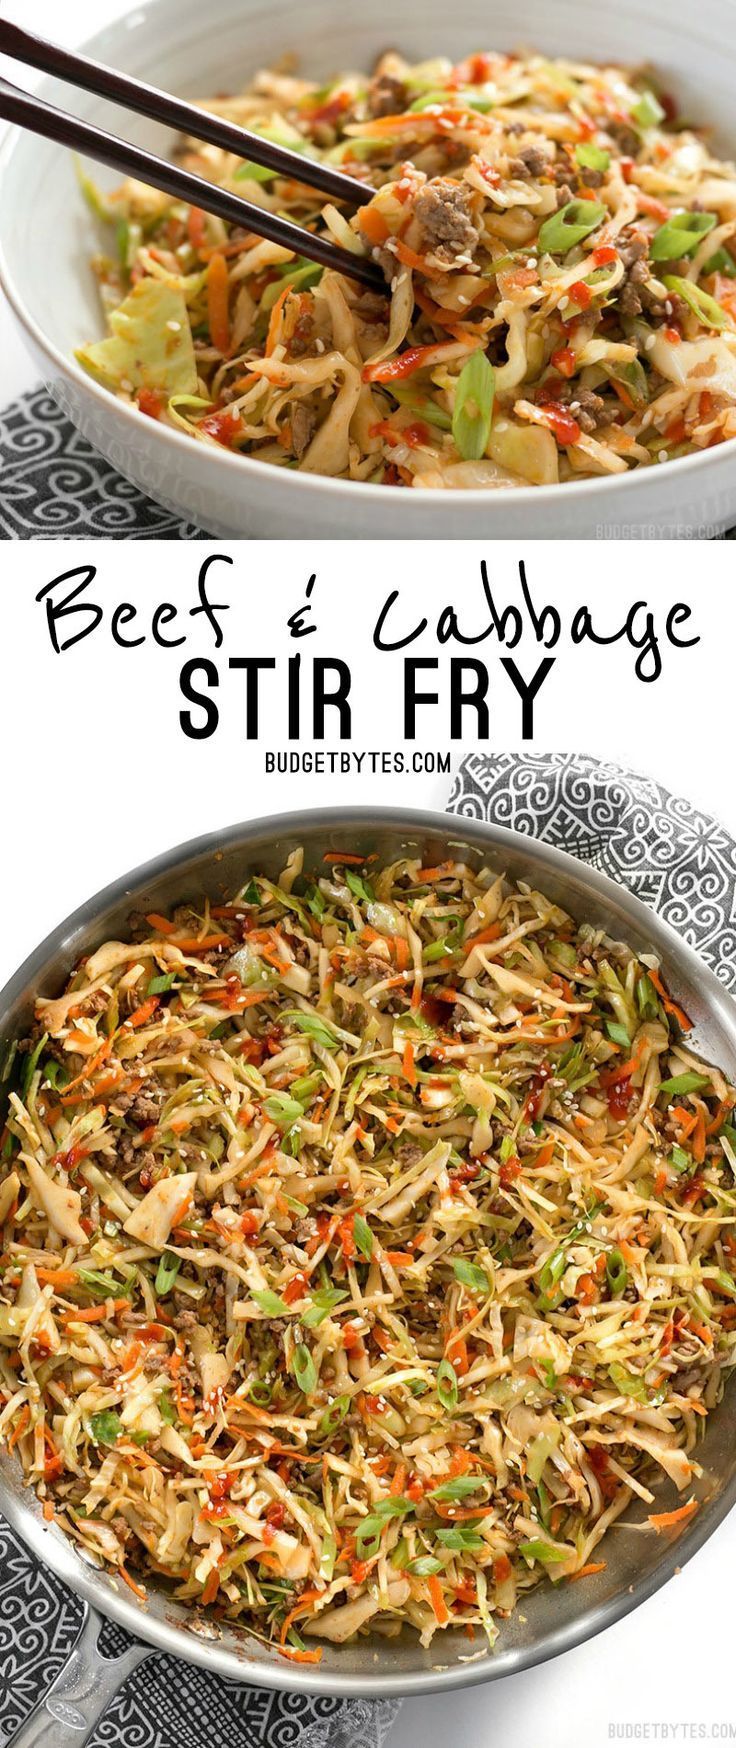 This fast and easy Beef and Cabbage Stir Fry is a filling low carb dinner with big flavor. @budgetbytes